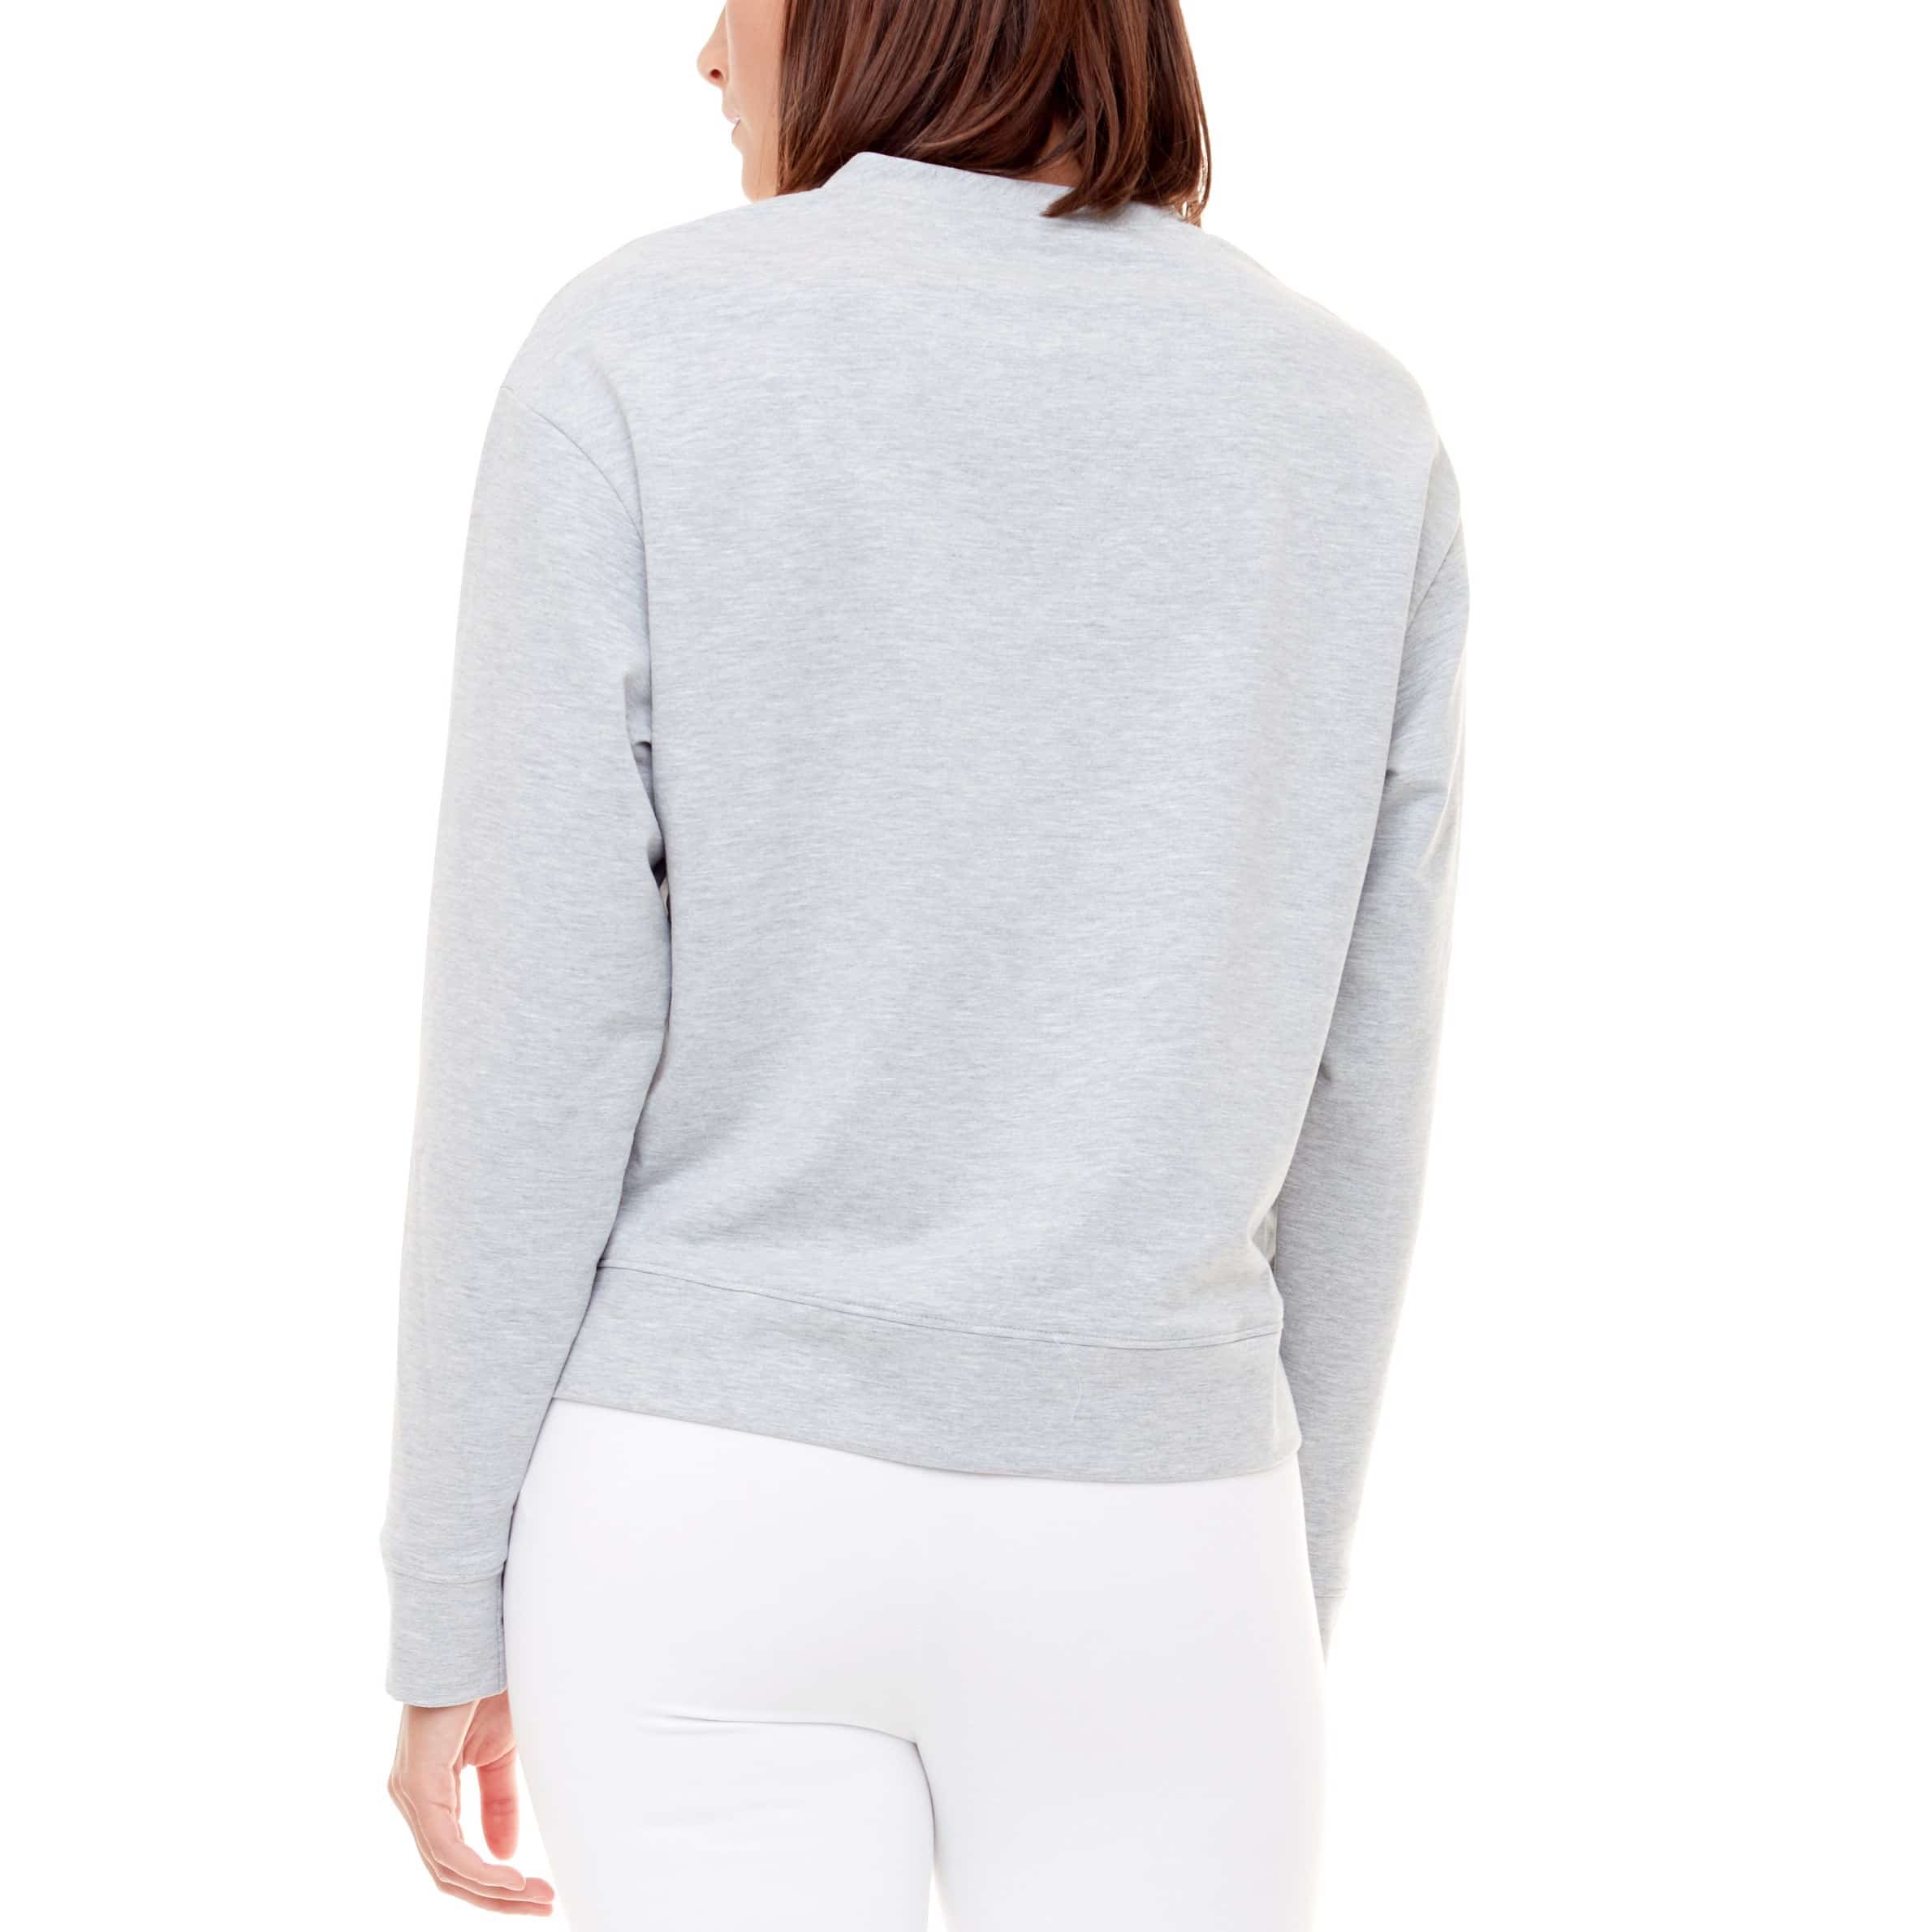 TWILL LONG-SLEEVE TOP - UP! Pants